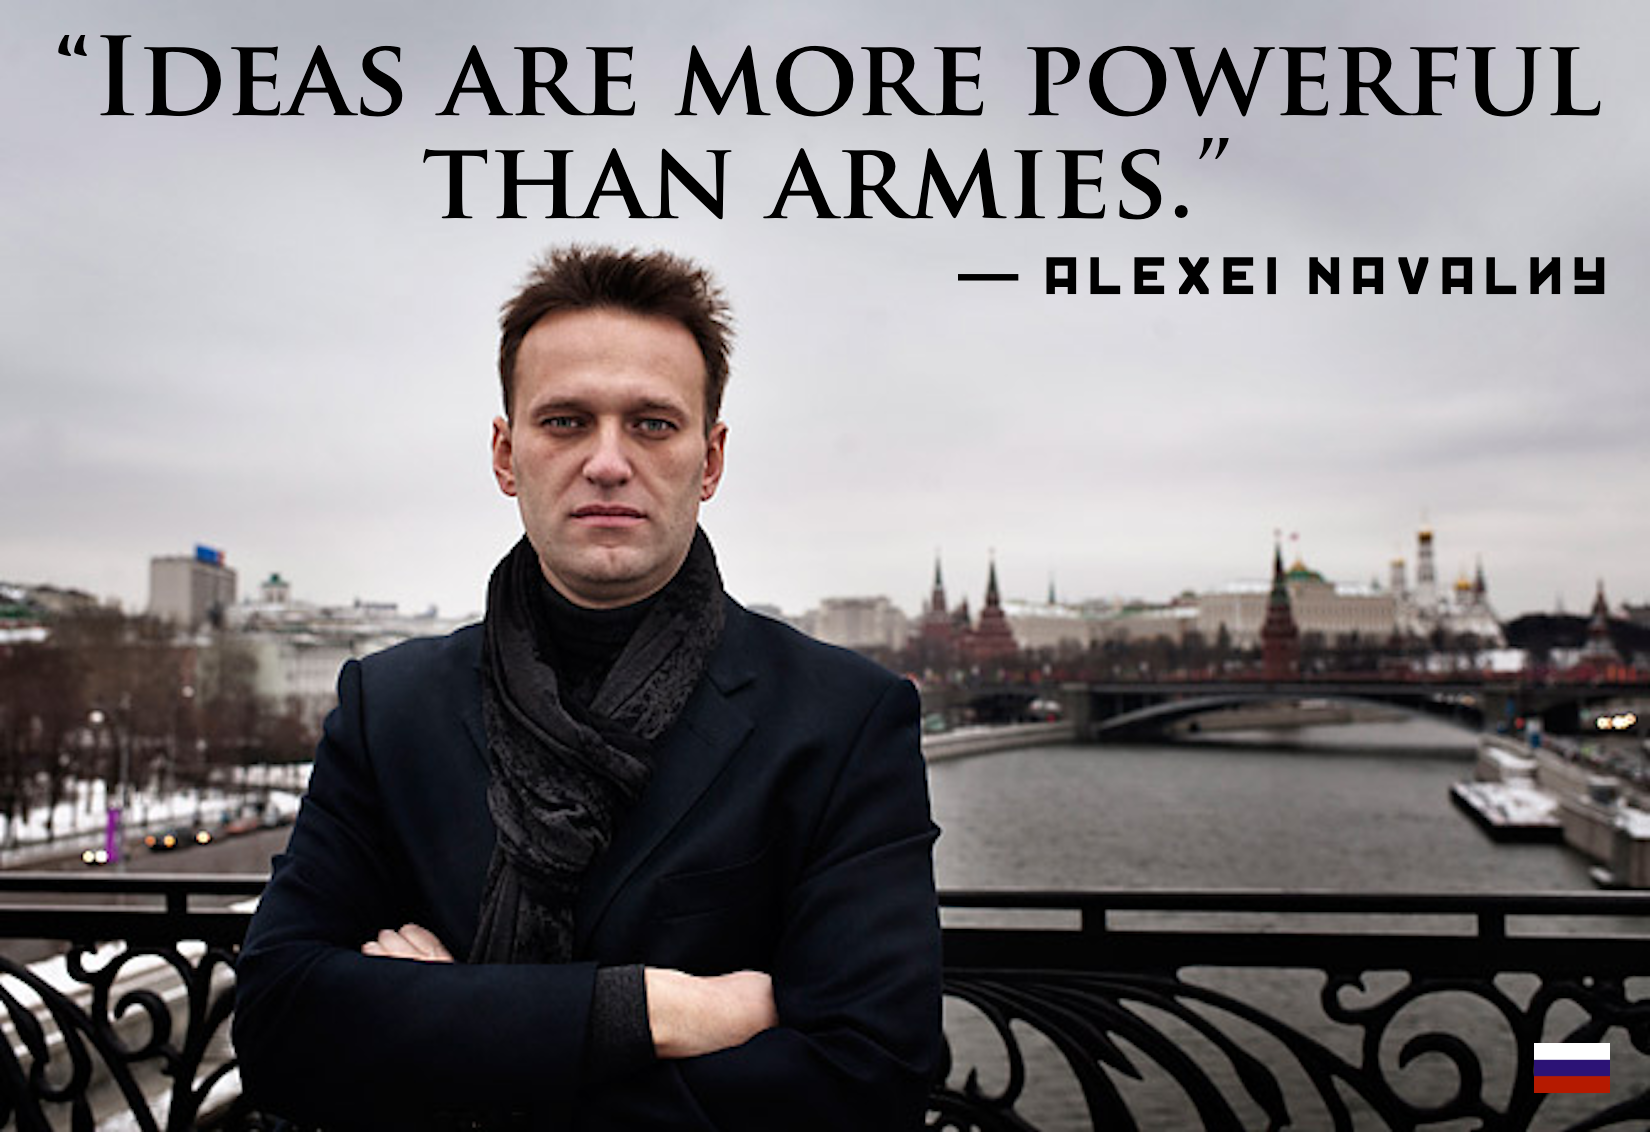 High Quality Alexei Navalny Quote Ideas Are More Powerful Than Armies Meme Blank Meme Template